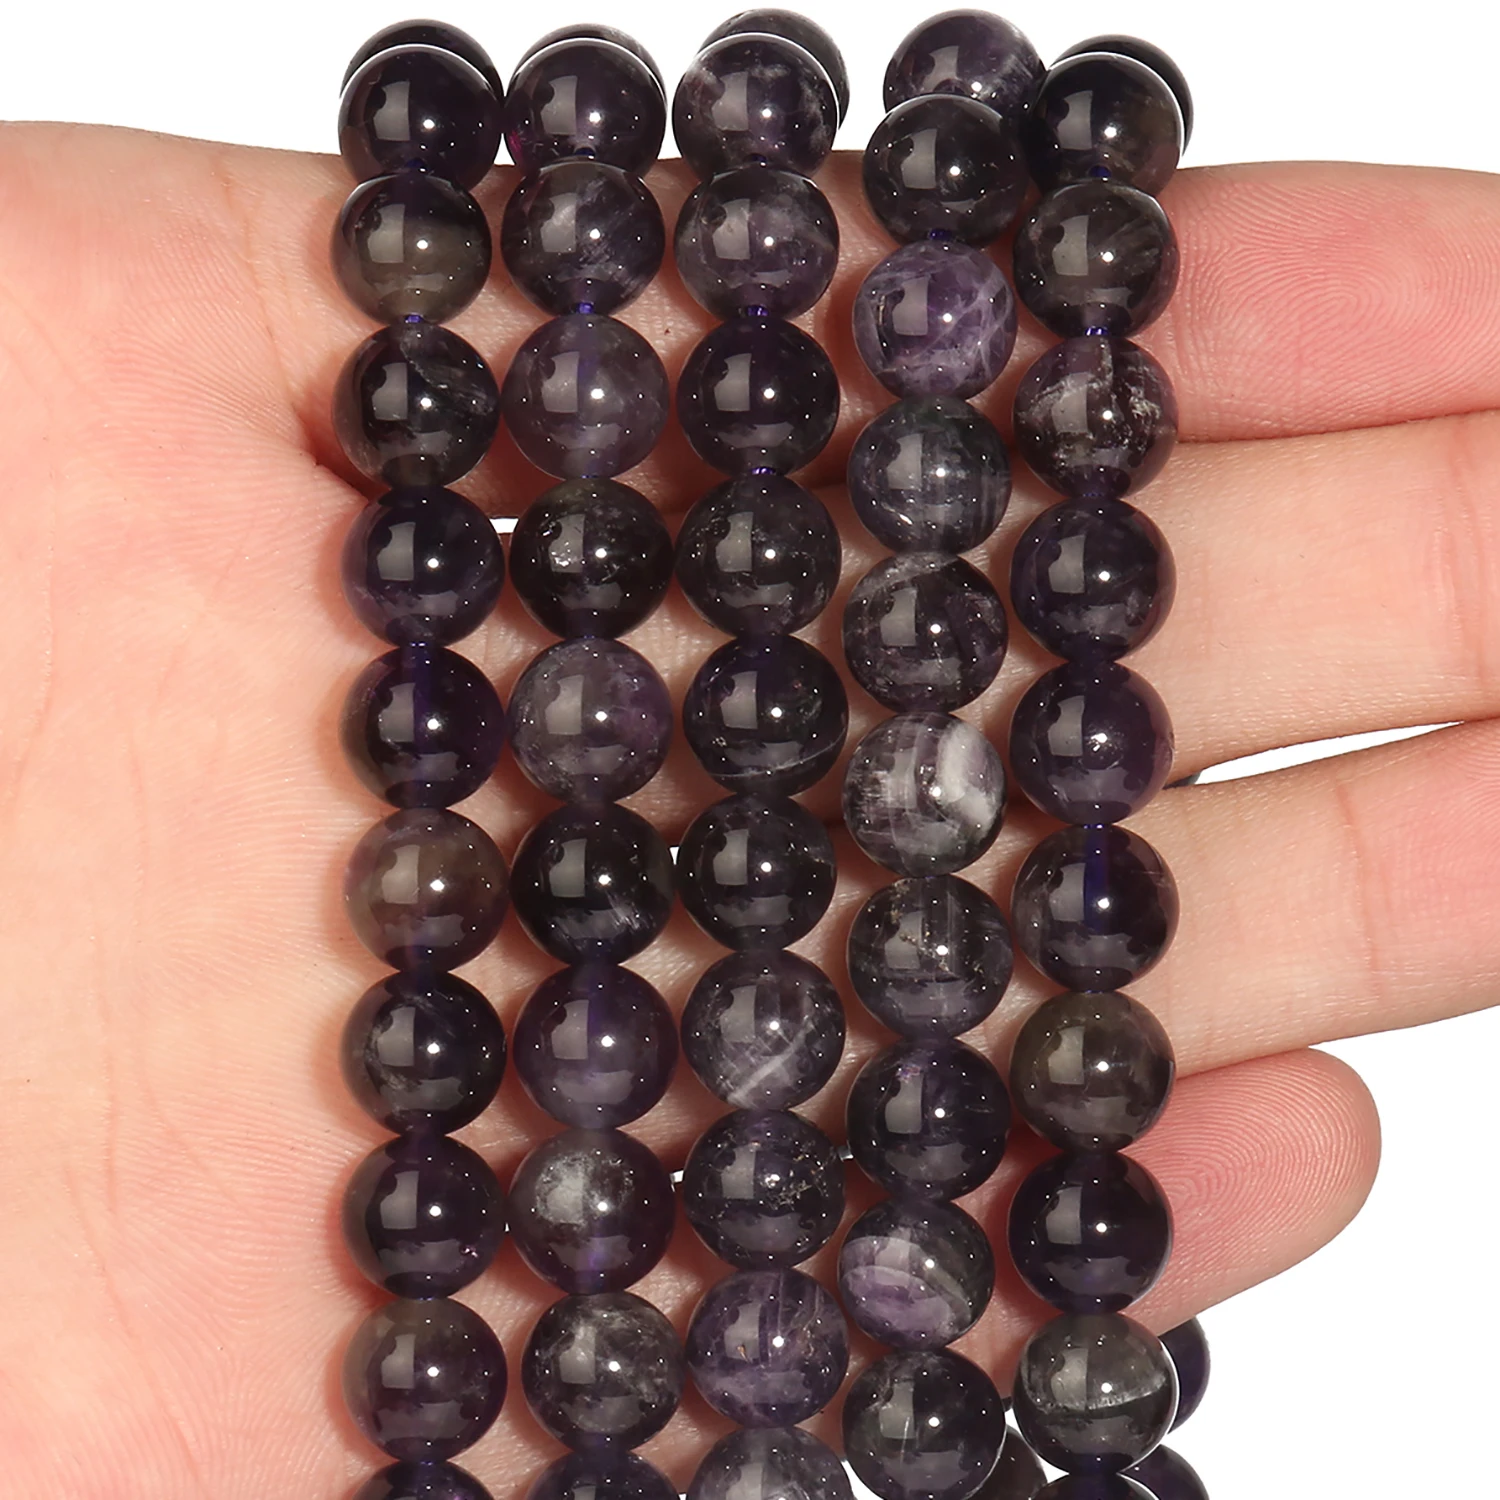 

Natural Stone Purple Amethyst Smooth Beads Round Loose Spacer 4 6 8 10 12mm Beads for Bracelet DIY Jewelry Making Necklace 15"